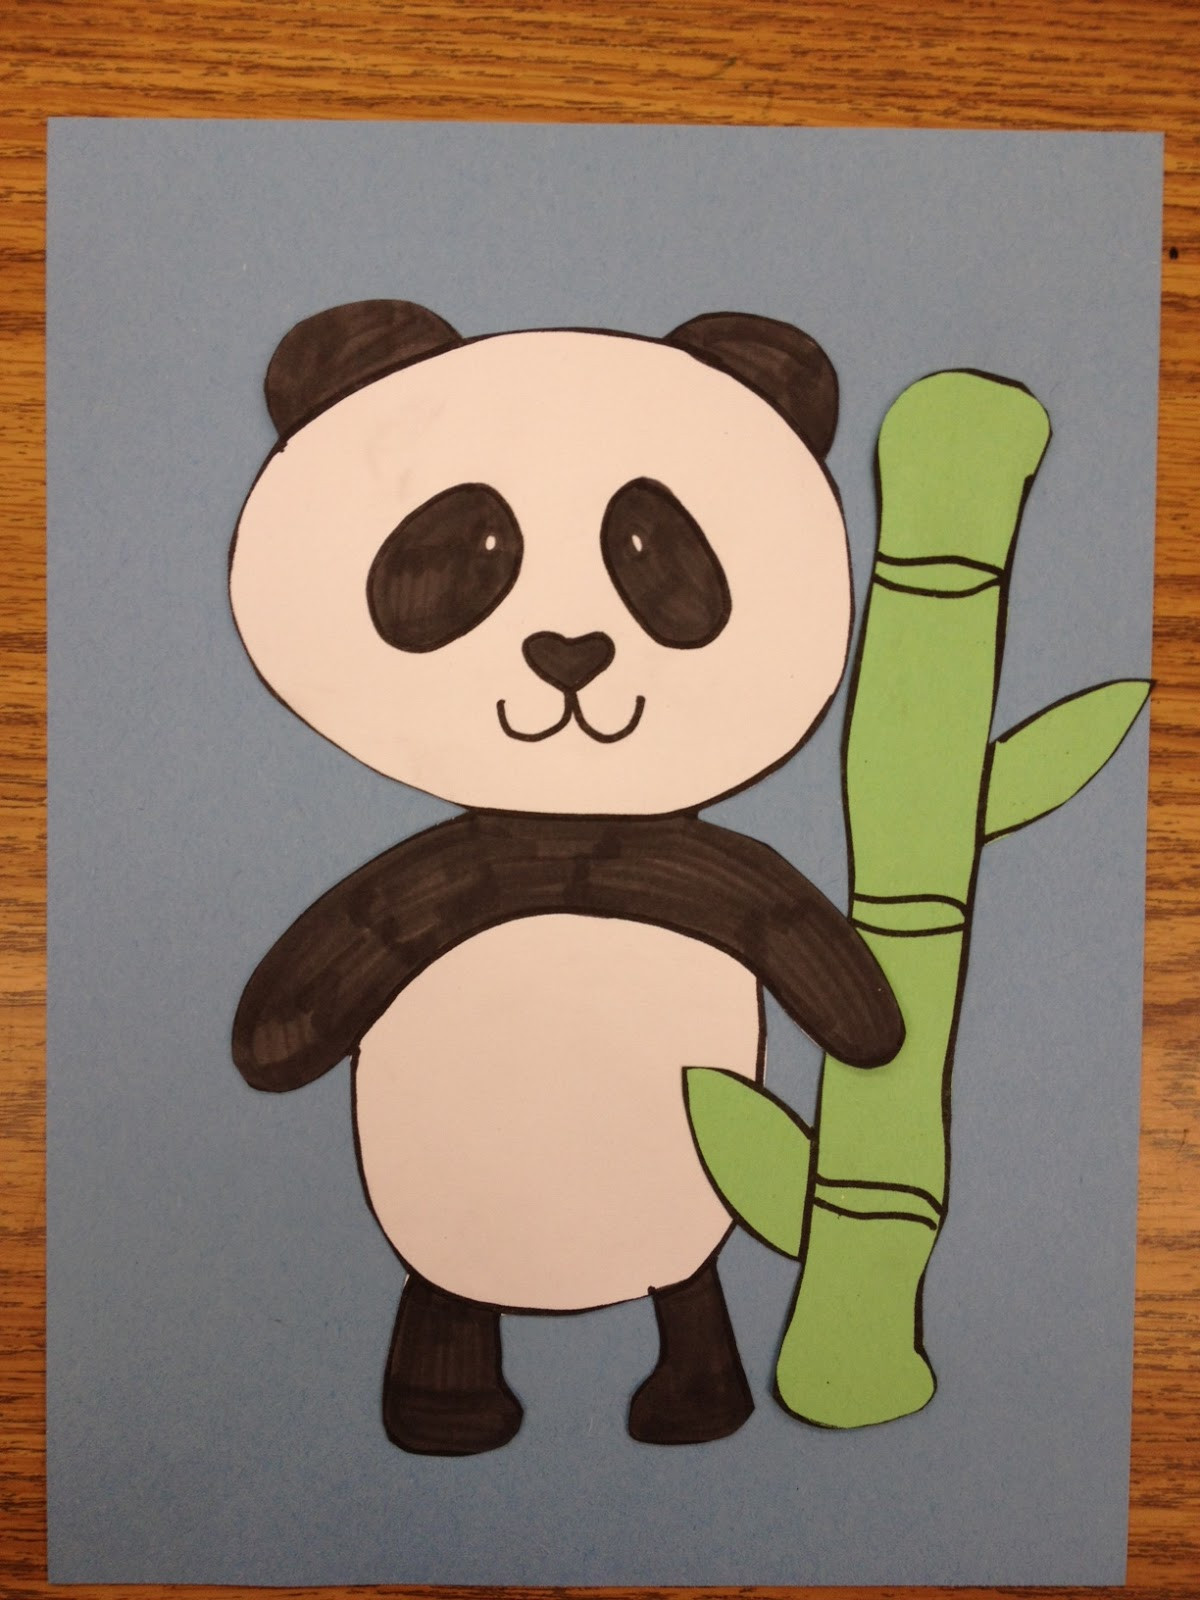 Panda Crafts For Preschoolers
 Cute Little Panda Apples and ABC s